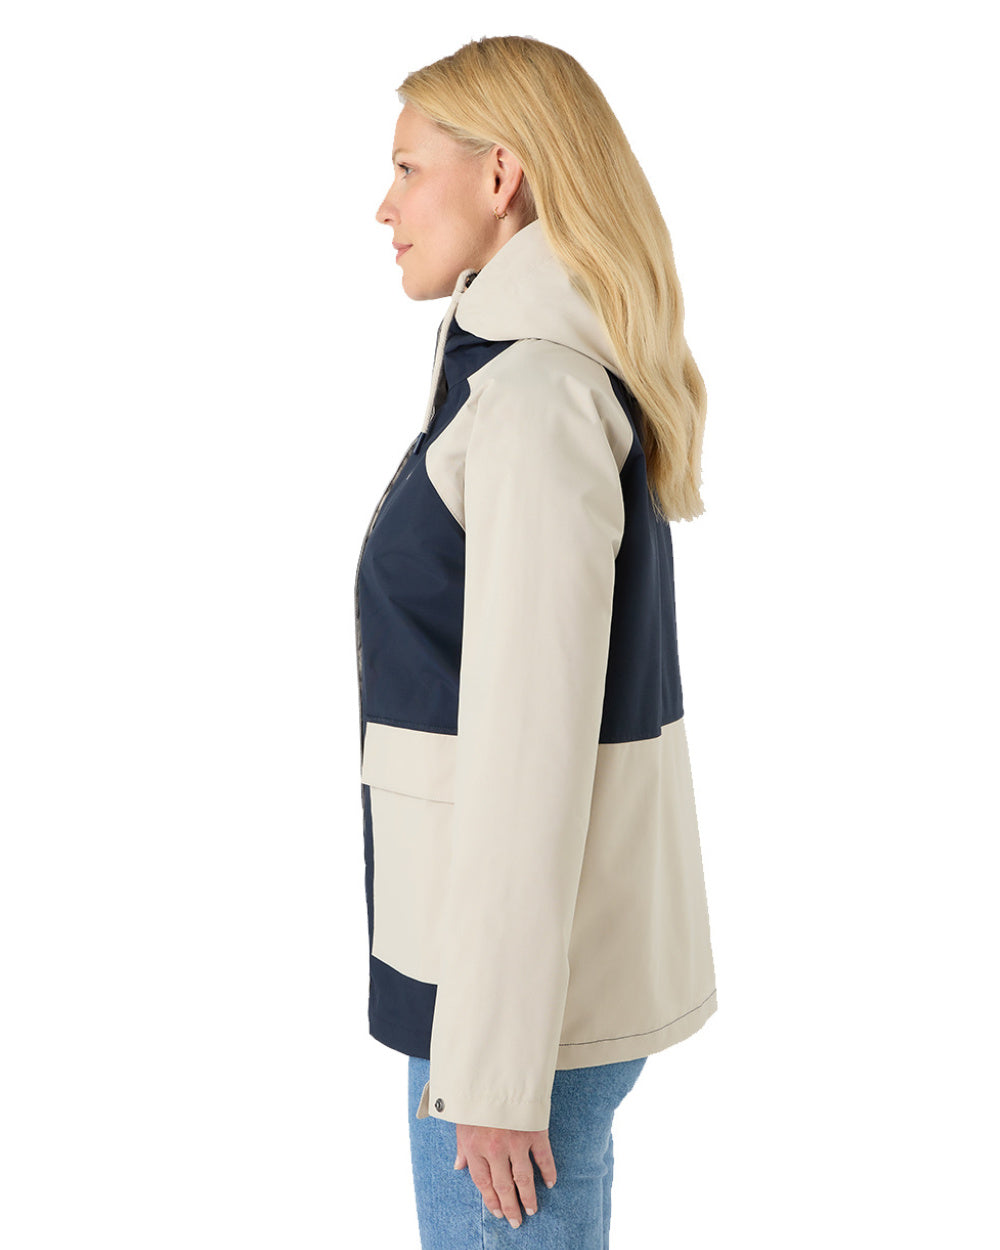 Pumice/Navy Coloured Musto Womens Classic Shore Waterproof Jacket On A White Background 